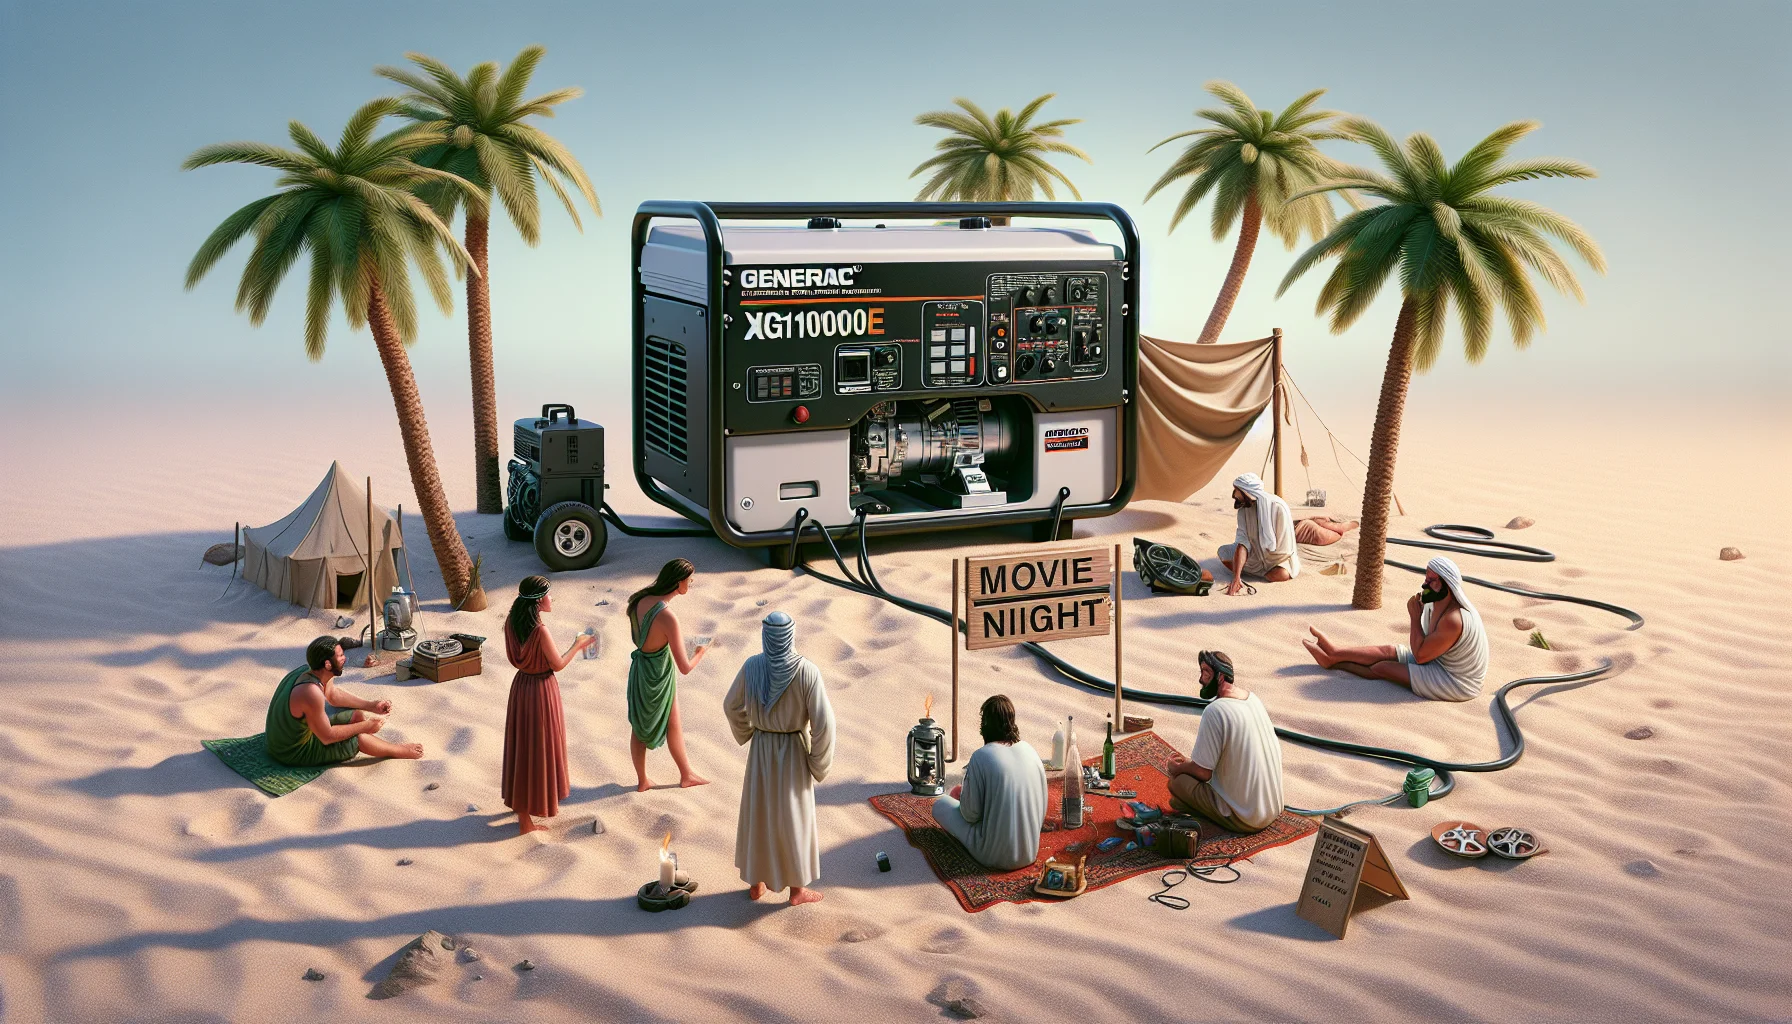 Create a detailed and realistic image of a Generac XG10000E Generator situated in a humorous scenario. The situation is a desert island with palm trees, where we see a few people of different descents and genders, looking utterly puzzled by a 'Movie Night' sign next to the generator. The film projector is connected to the generator, with hints of an open-air movie setup. The humor arises from the discrepancy of having a high-tech device in a primitive situation, coupled with the idea of generating electricity to entertain oneself in an otherwise desolate environment.